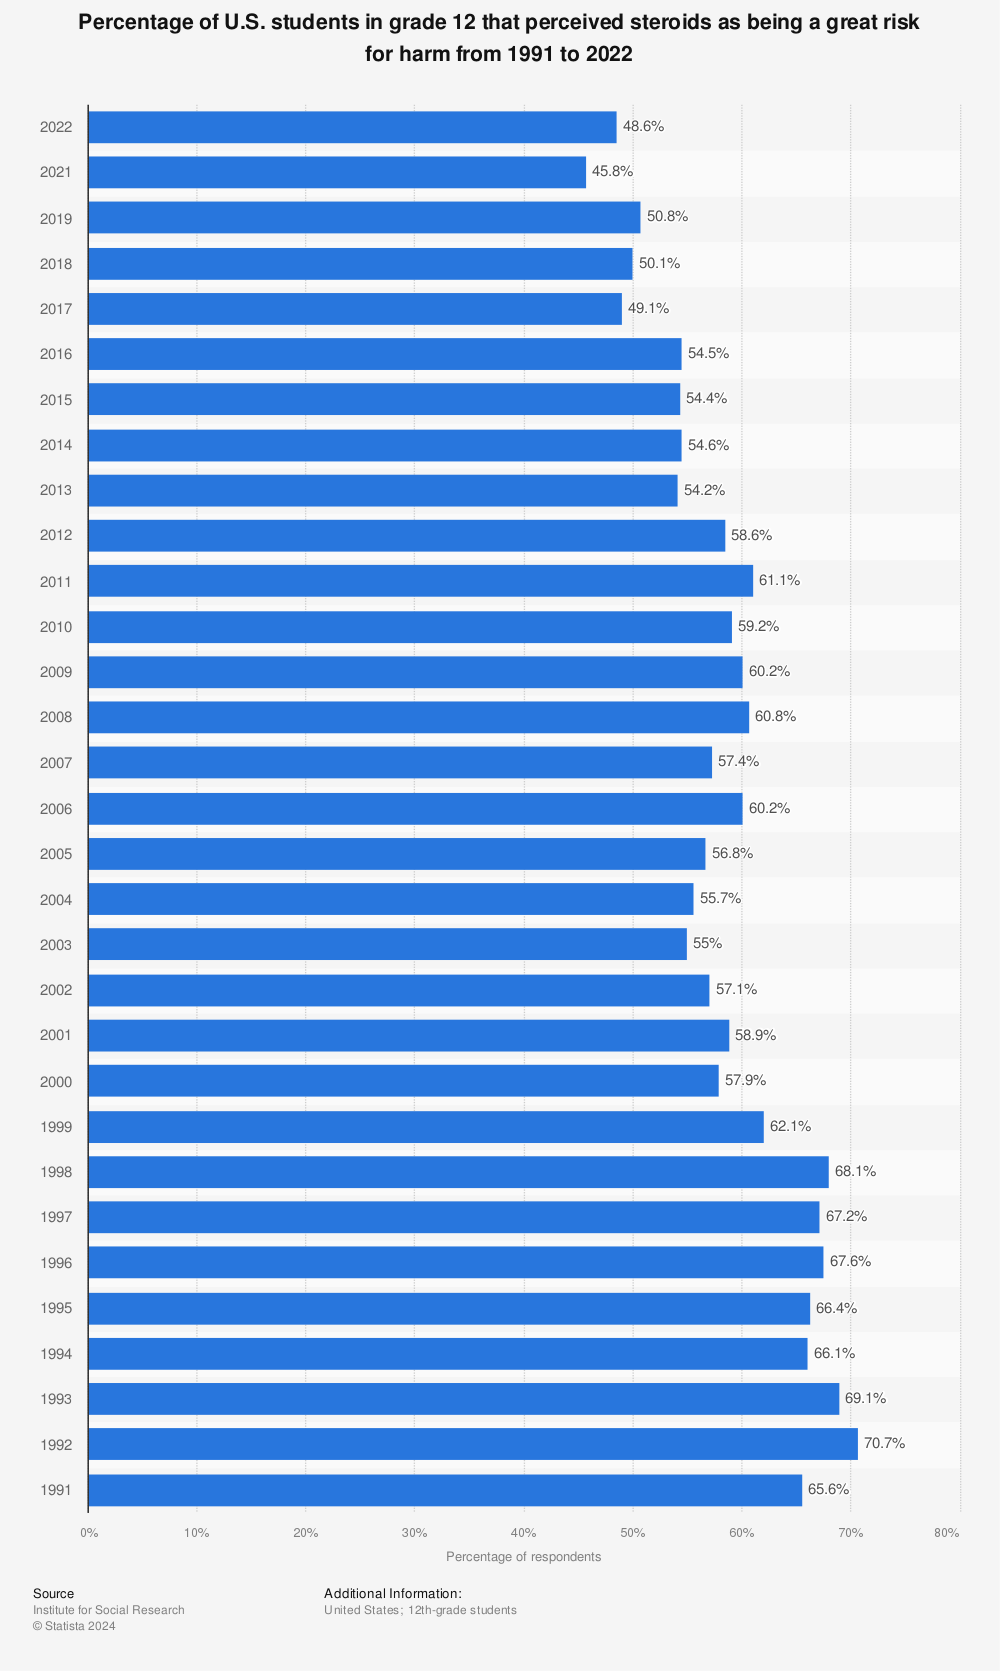 Statistic: Percentage of U.S. students in grade 12 that perceived steroids as being a great risk for harm from 1991 to 2019 | Statista